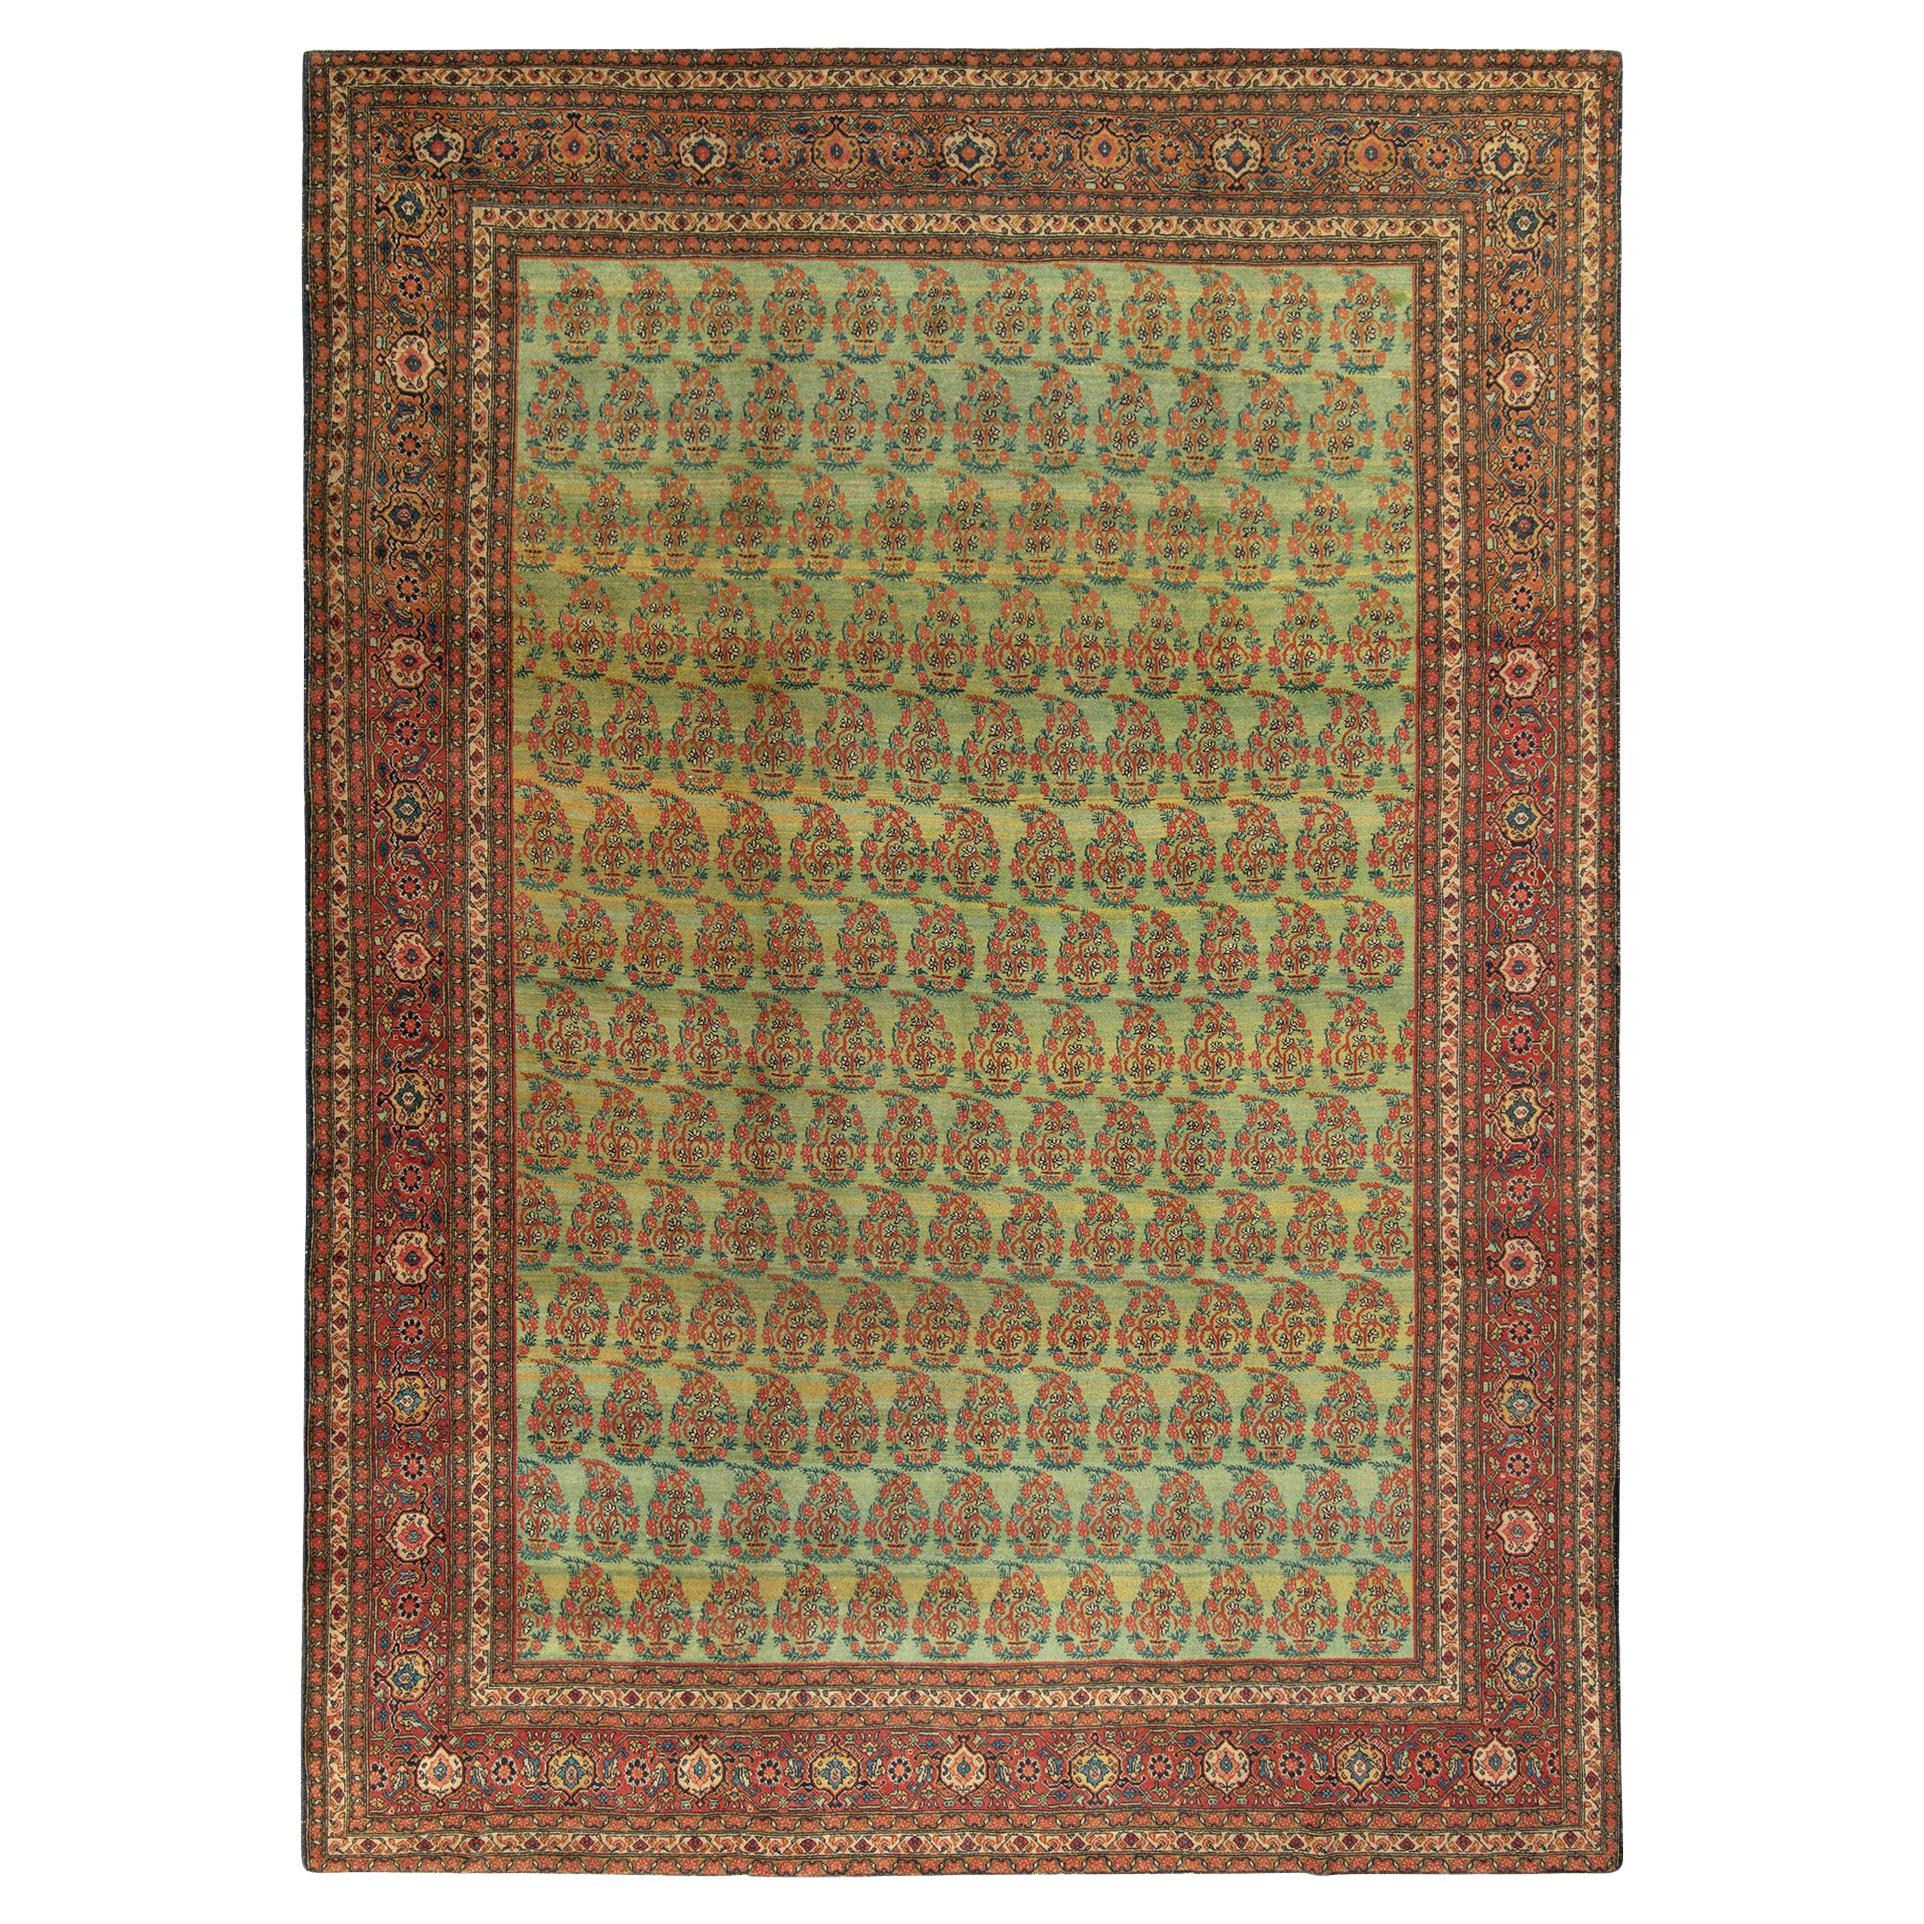 Antique Tabriz Persian Rug in an All over Green, Red Floral Pattern